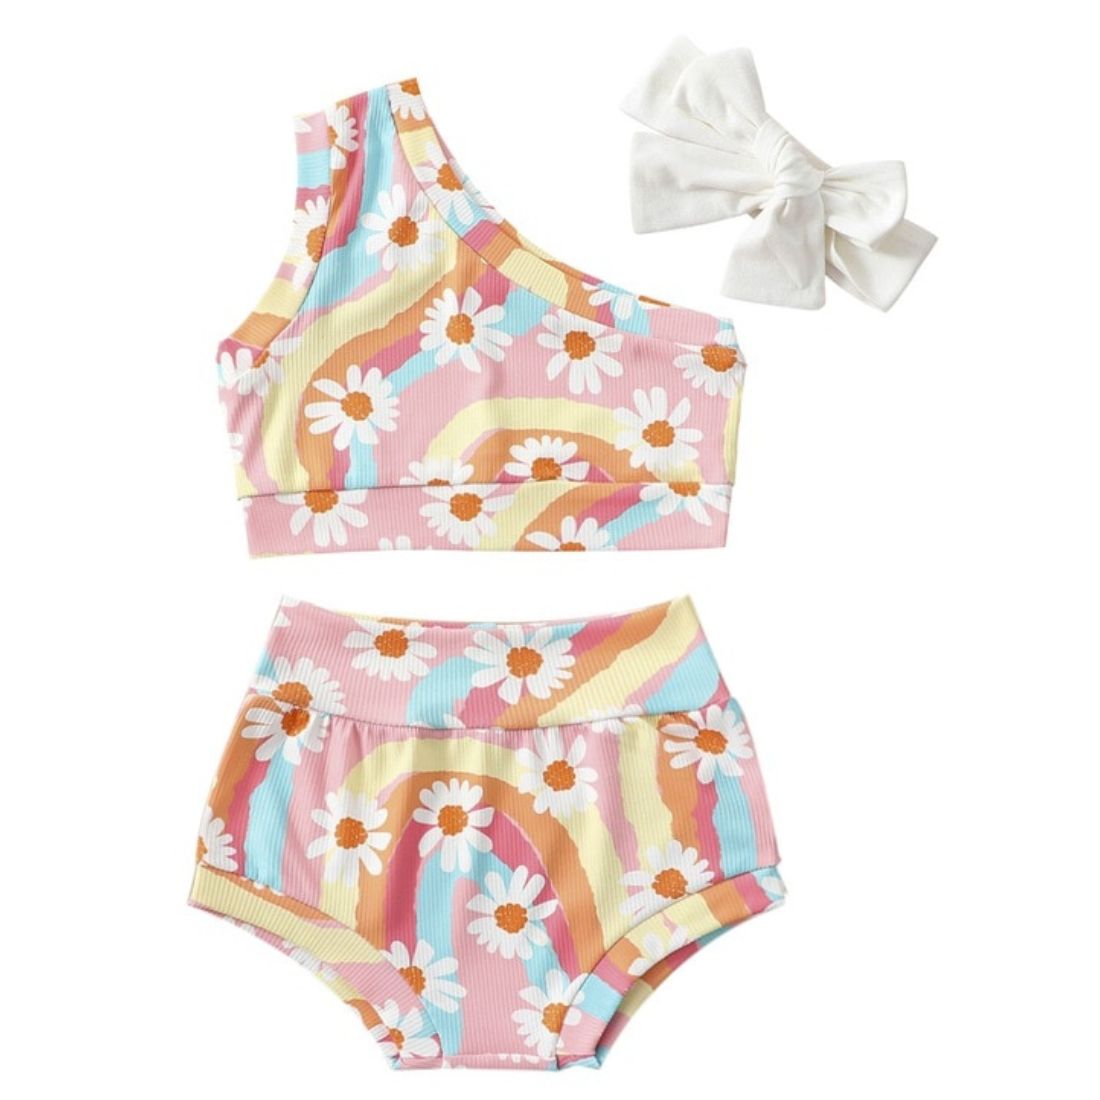 Groovy Daisy Baby 2 Piece Clothing Set - My Trendy Youngsters | Buy on-trend and stylish Baby and Toddler Clothing Sets @ My Trendy Youngsters - Dress your little one in Style @ My Trendy Youngsters 